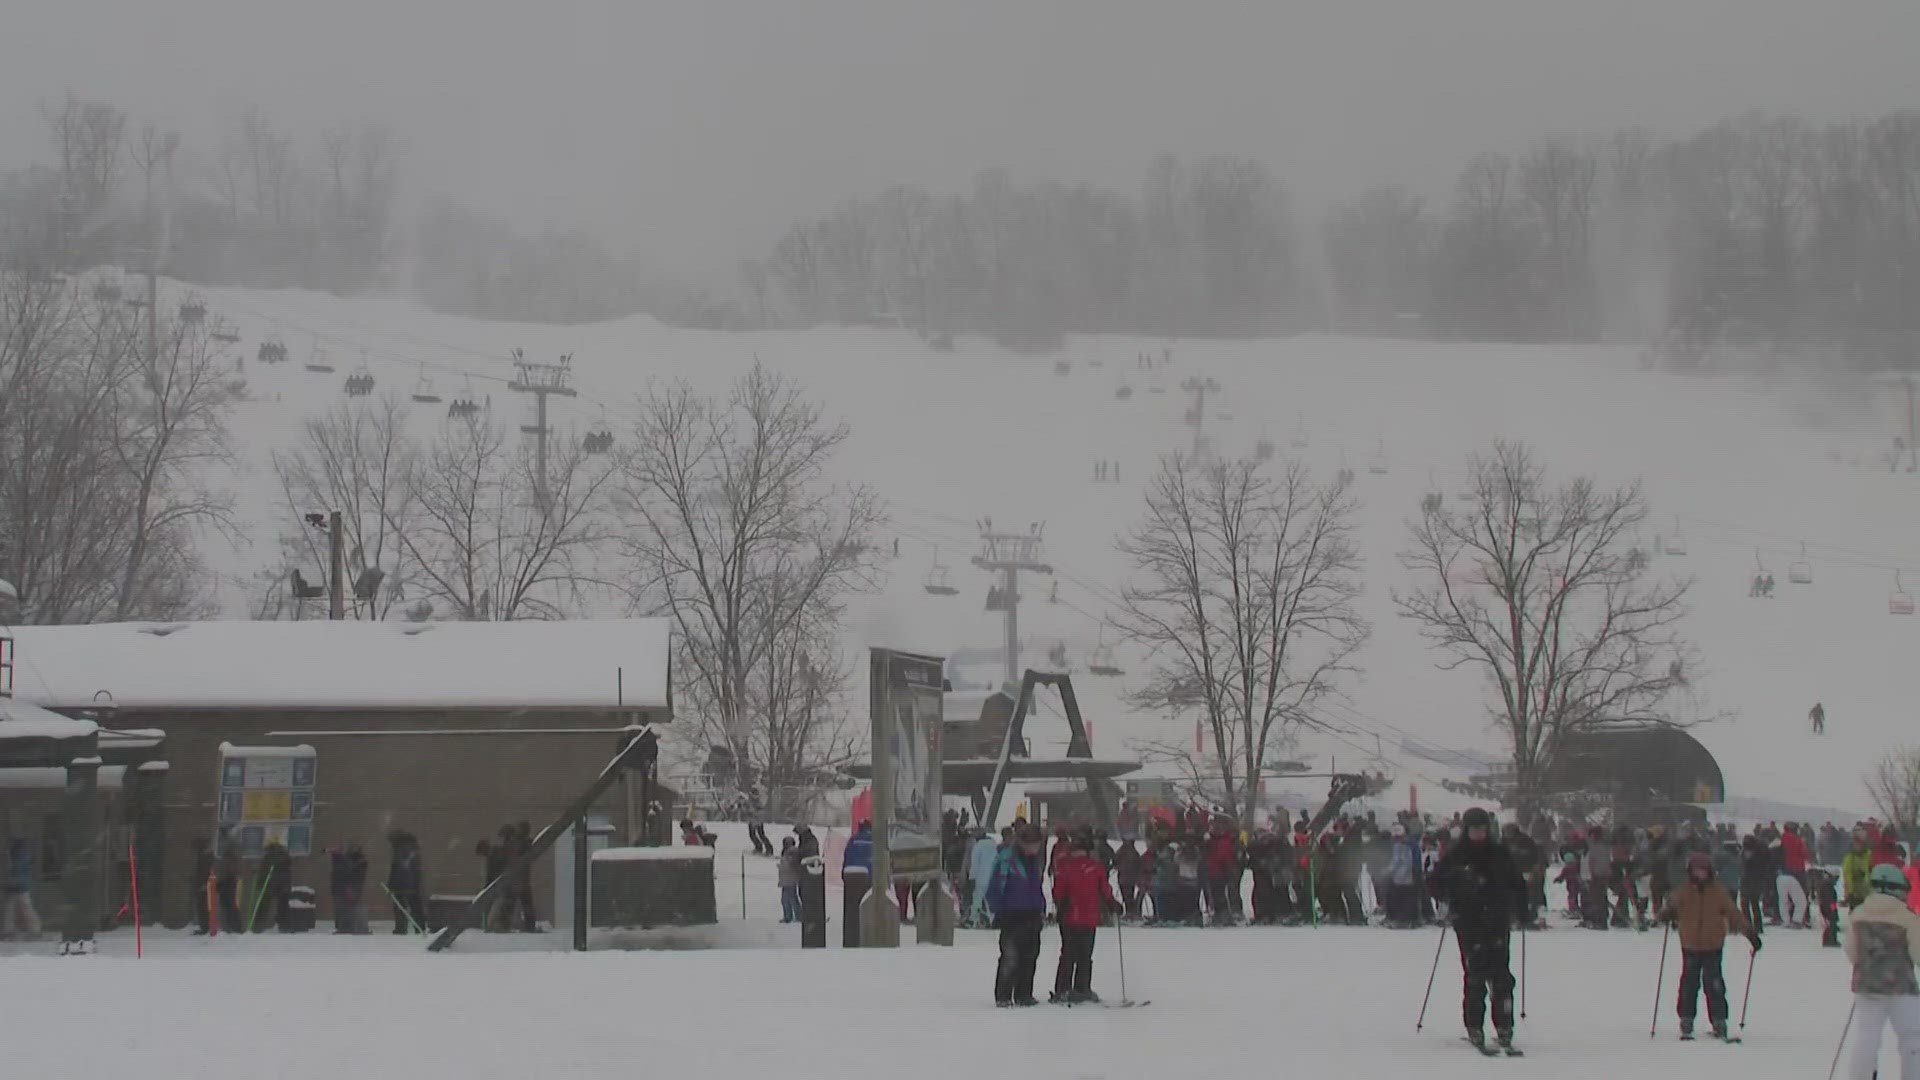 Stephanie Haney checks in from Boston Mills, where happy skiers and snowboarders took advantage of Friday's wintry conditions.